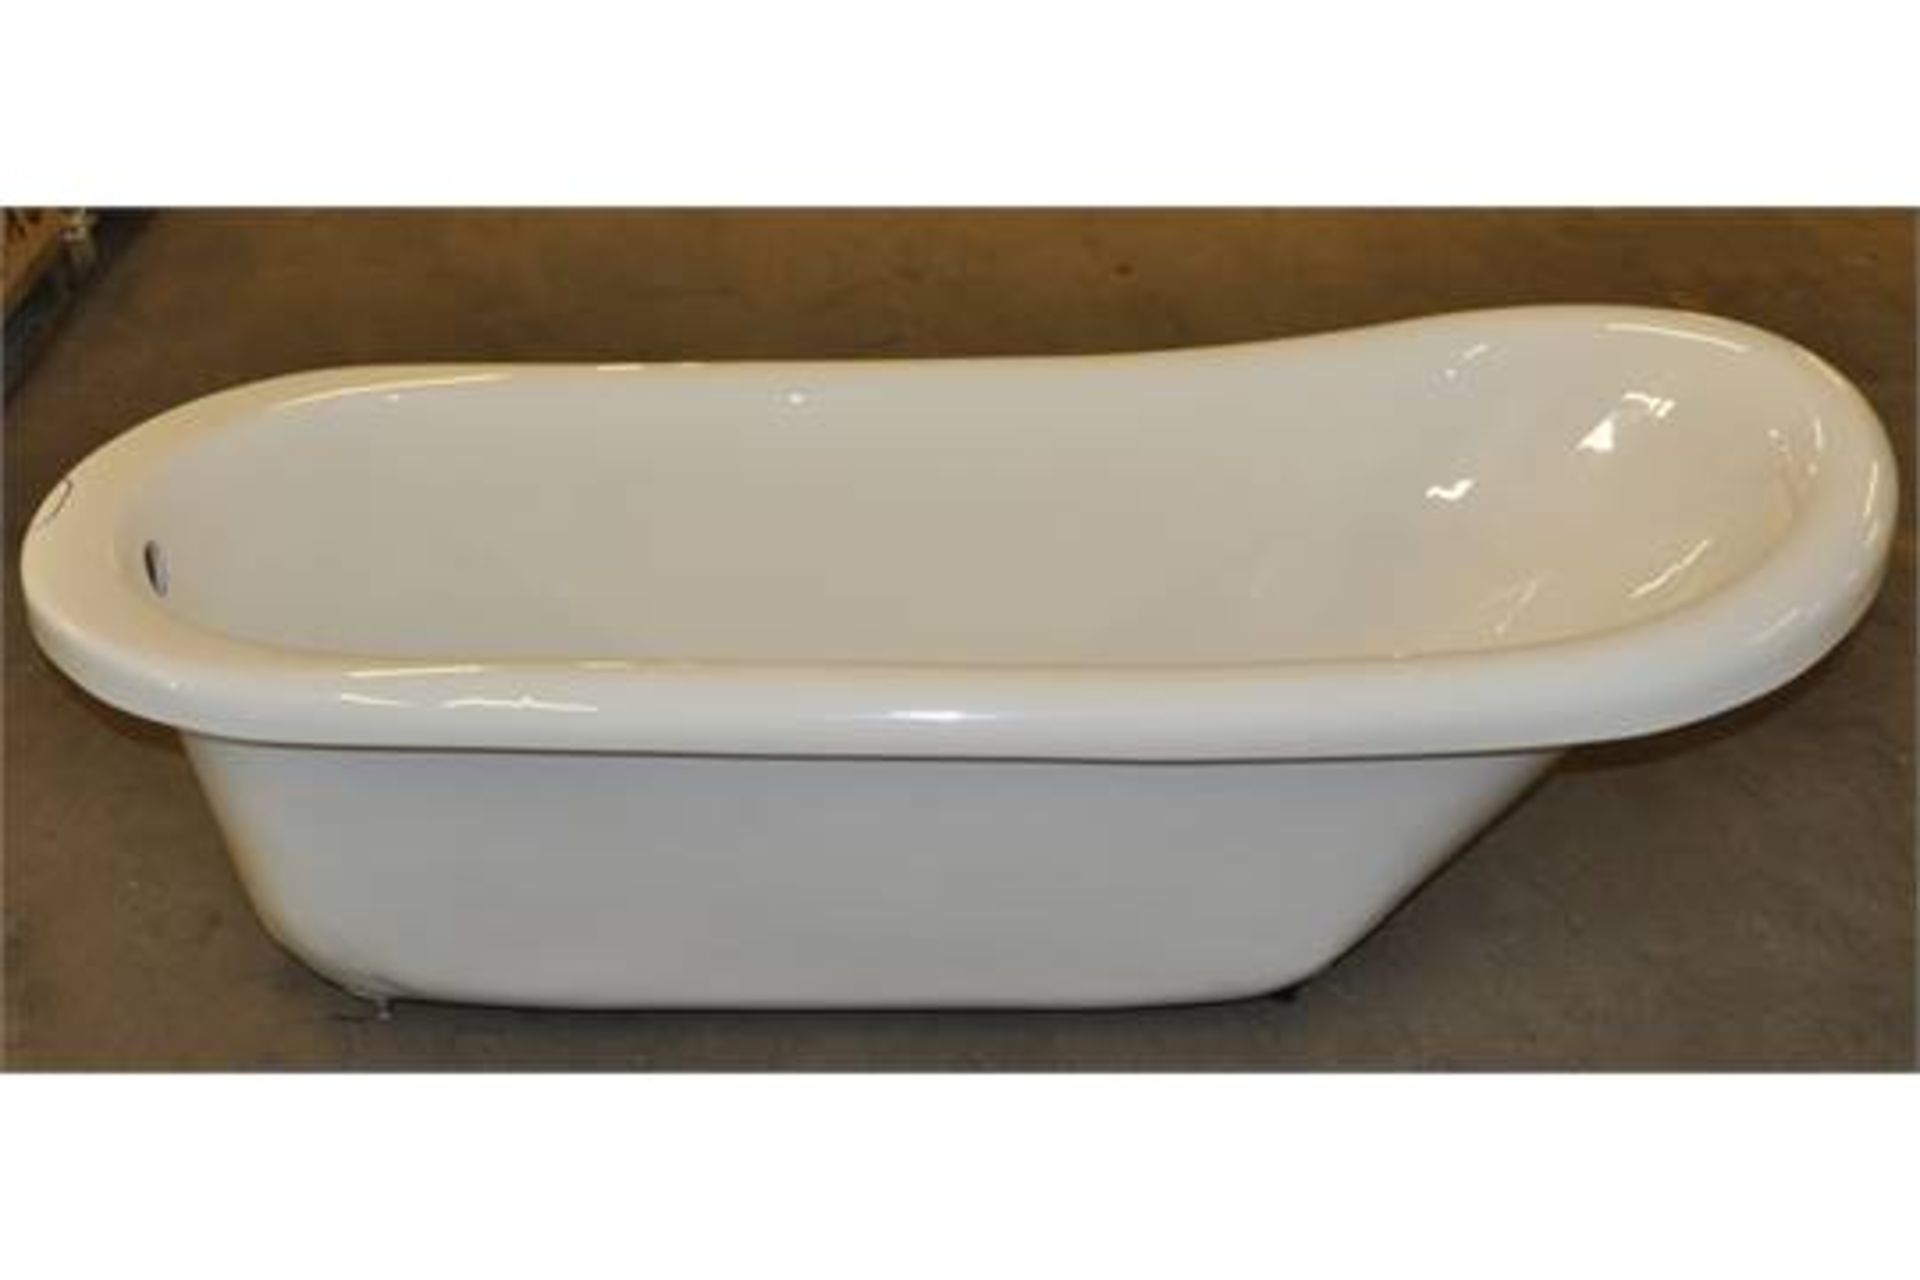 1 x Luxury Freestanding Roll Top Slipper Bath with Chrome Ball & Claw Feet - Stunning Regal Style - Image 2 of 3